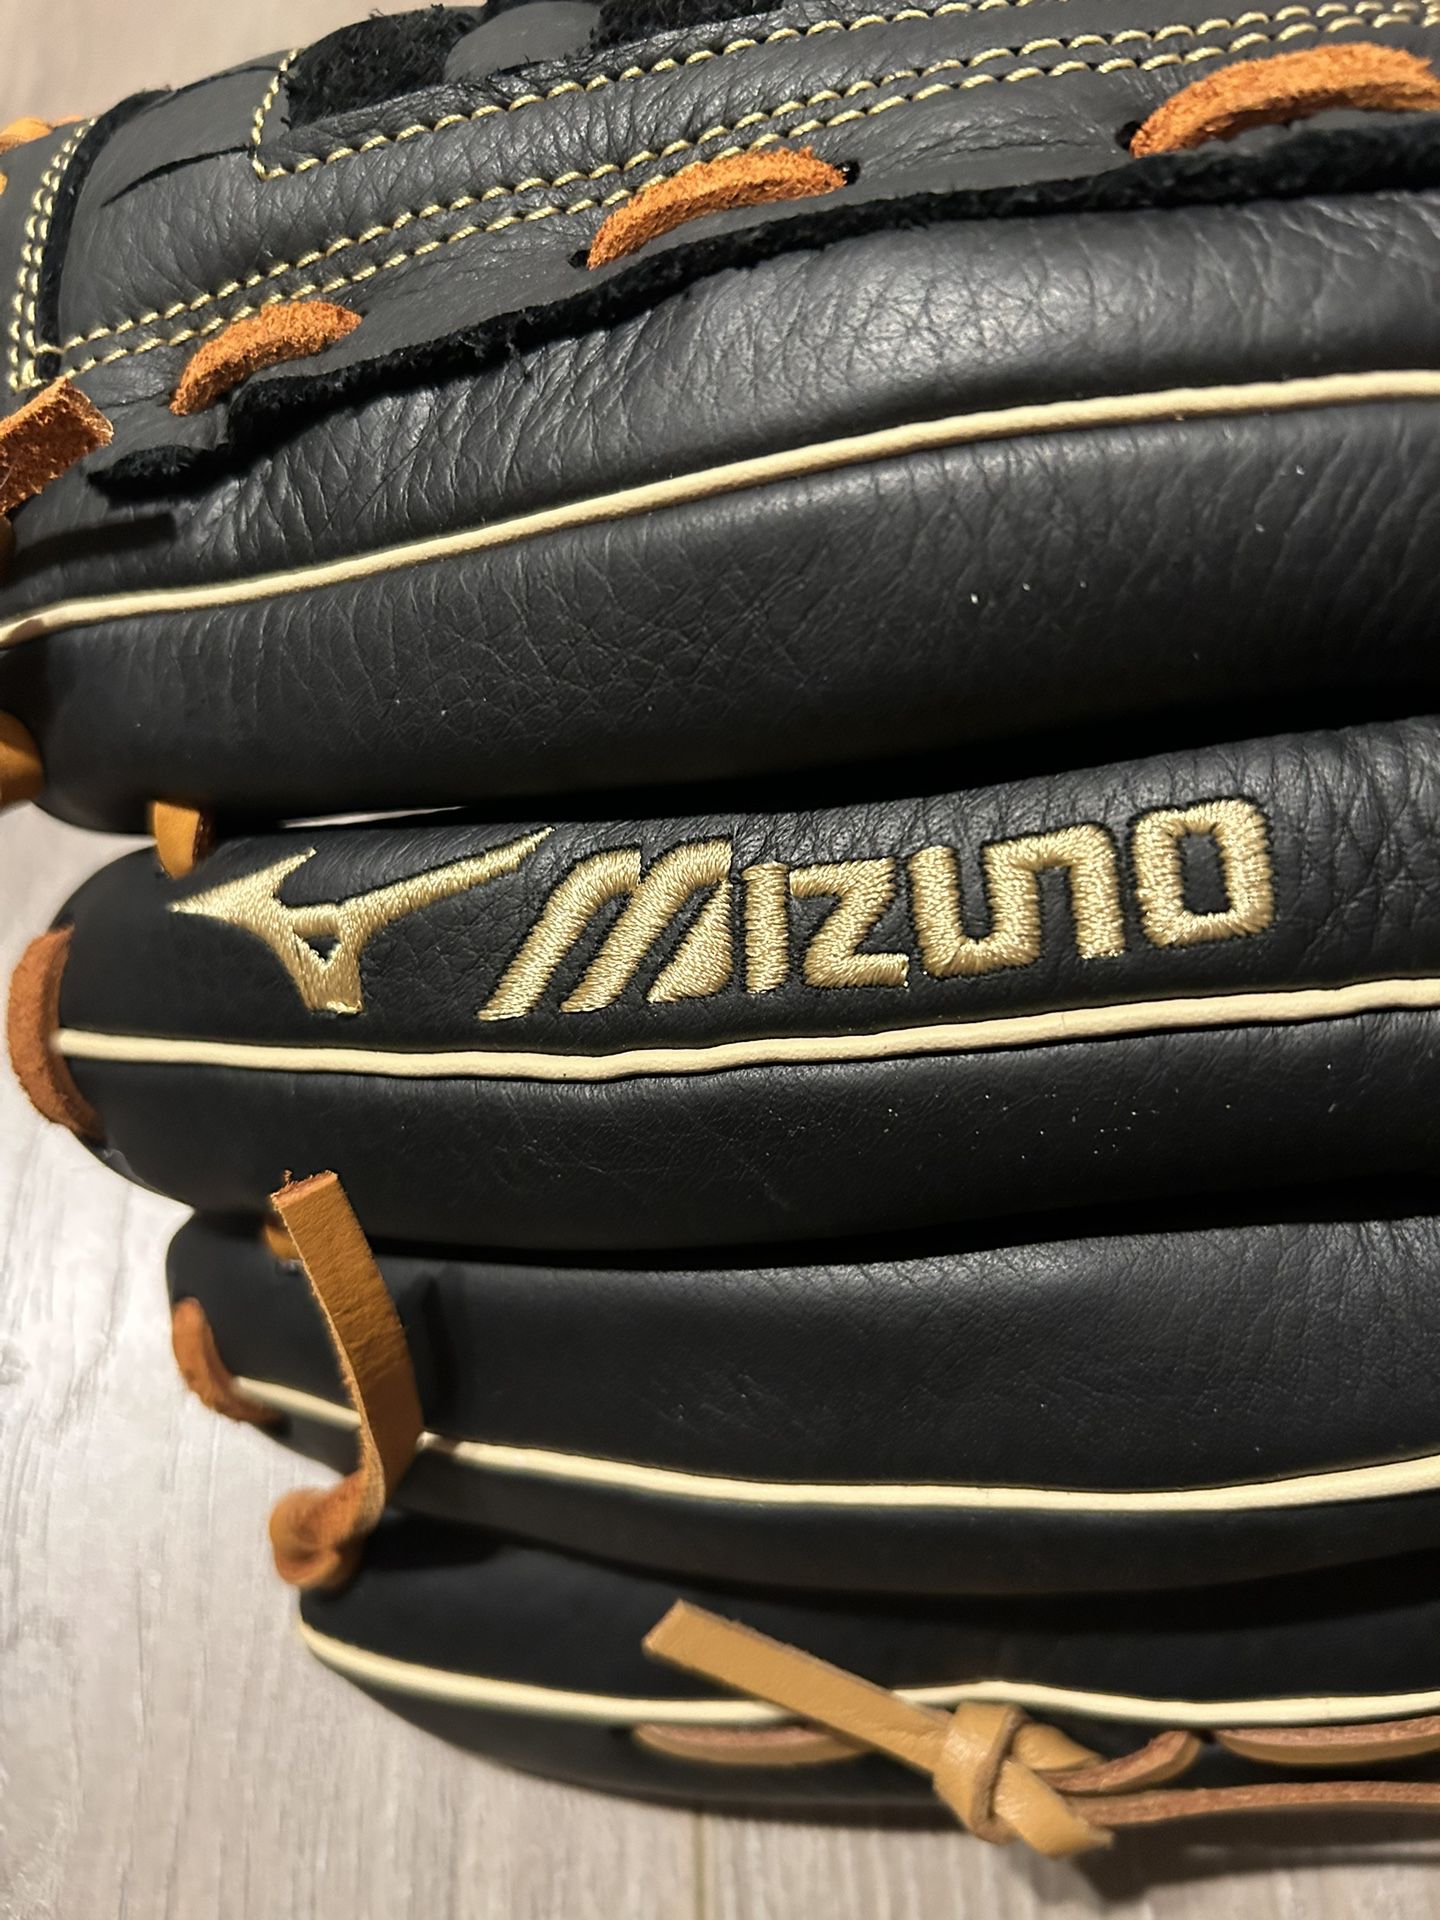 New Mizuno Youth 12” Inch Prospect Select Baseball Glove “Butter Soft” Inner Lining Little League World Series Quality